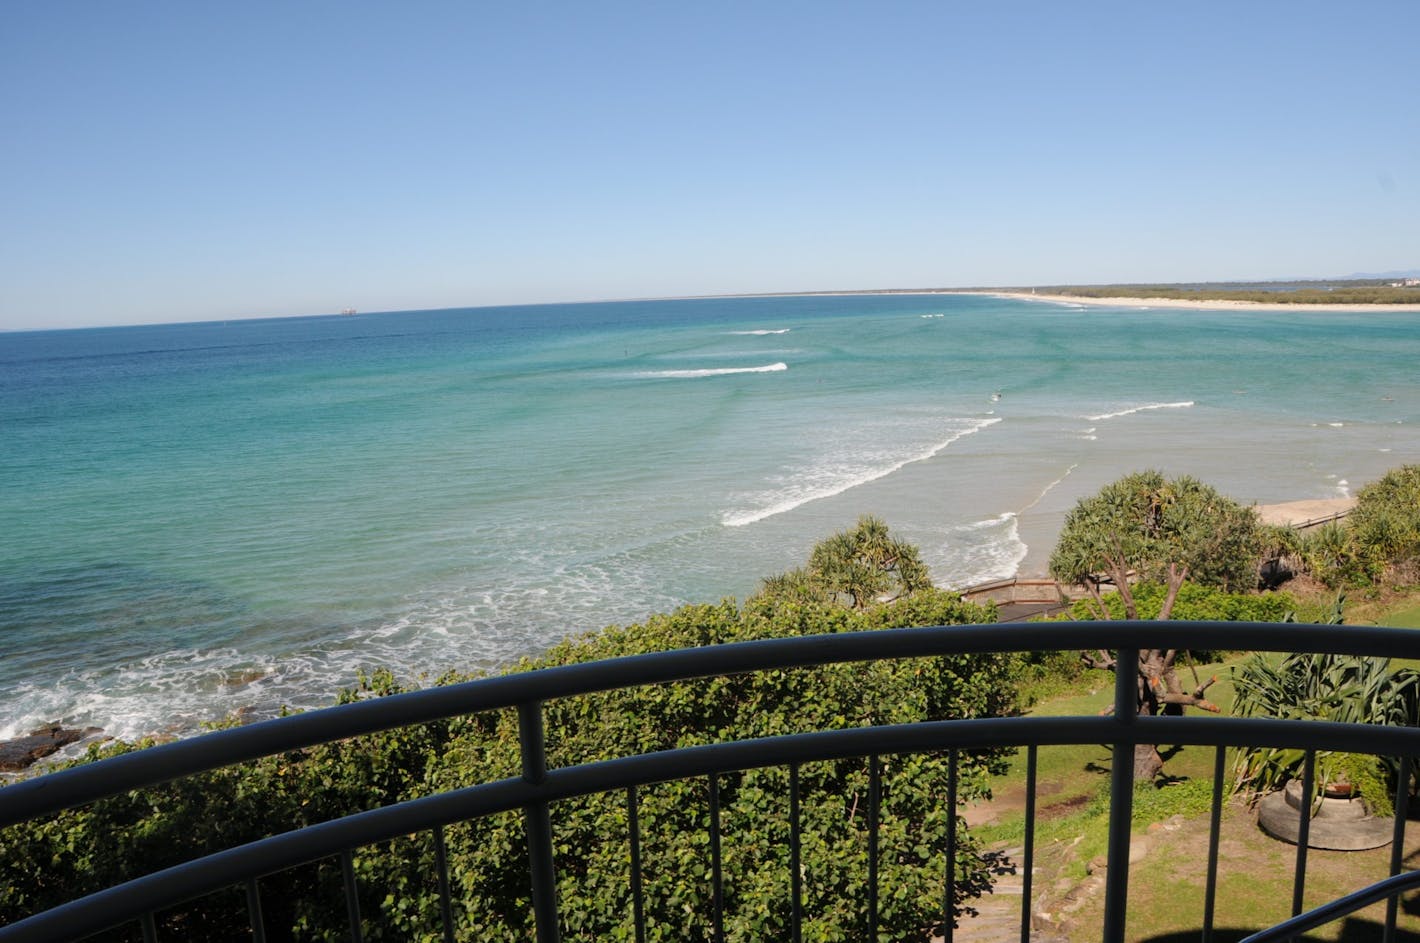 Unit 8 Seaspray Apartments, Absolute Waterfront